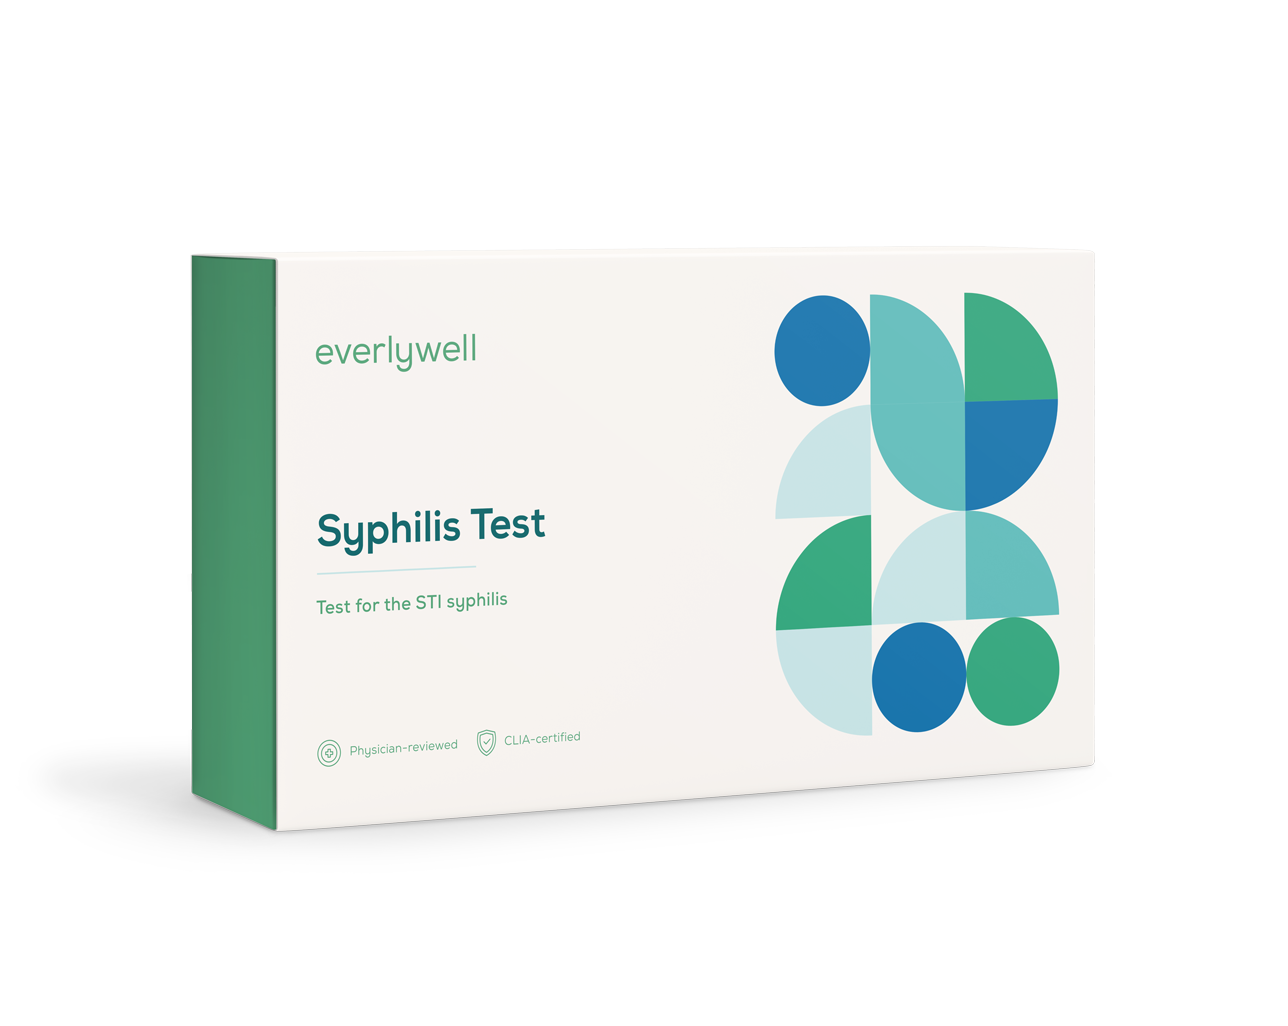 At-home Syphilis Test, easy-to-use syphilis test kit in a box